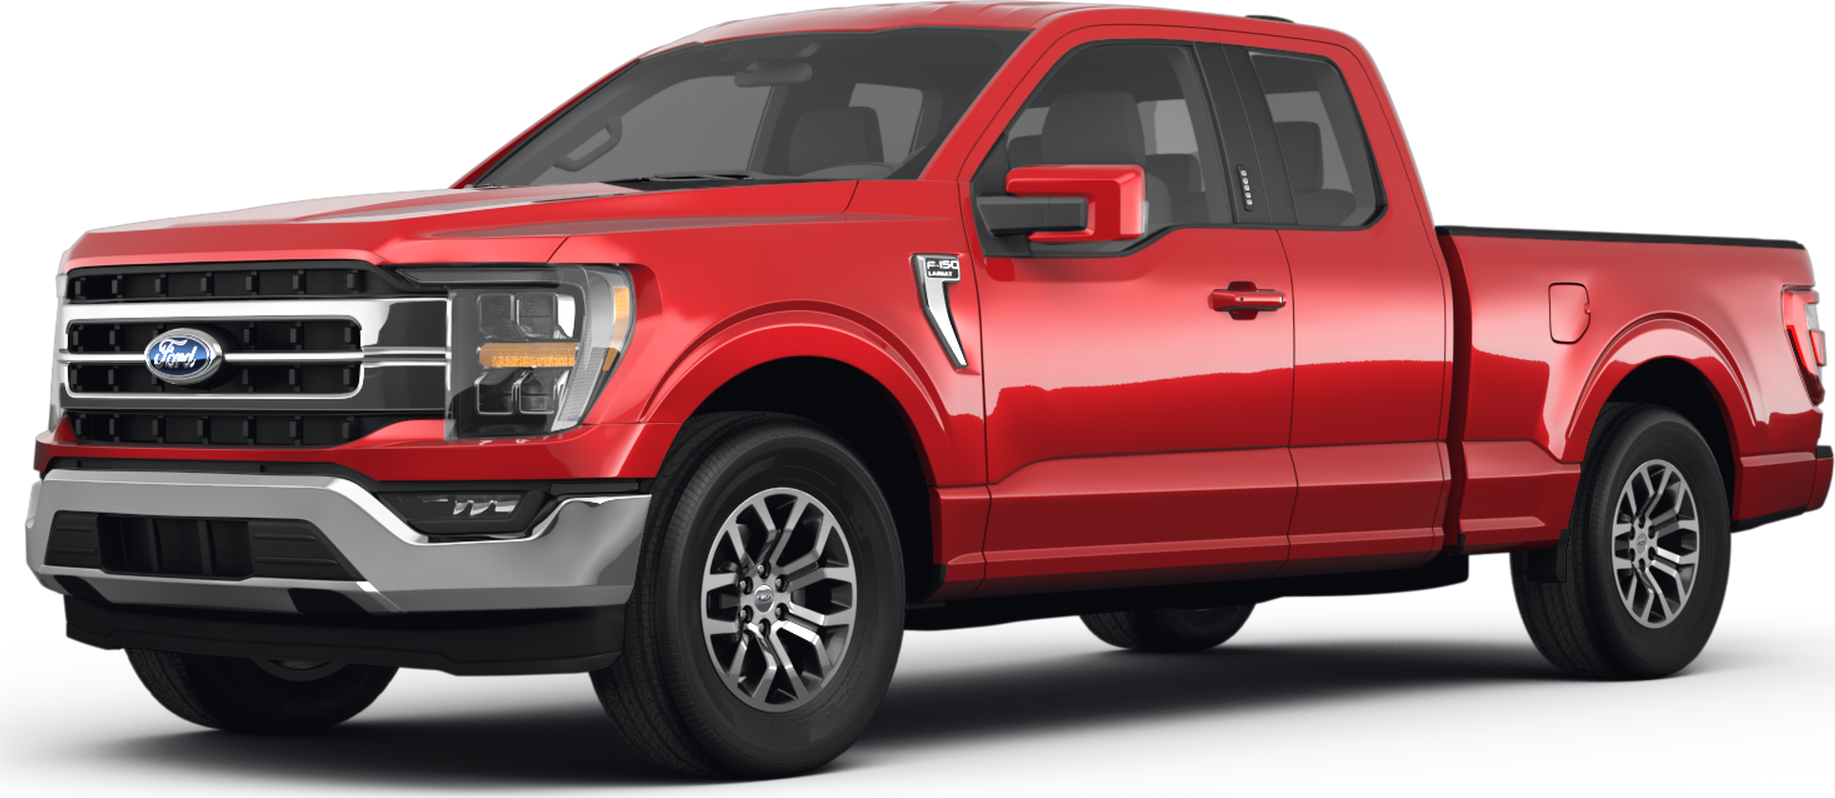 2022 Ford F150 Super Cab Price, Reviews, Pictures & More Kelley Blue Book